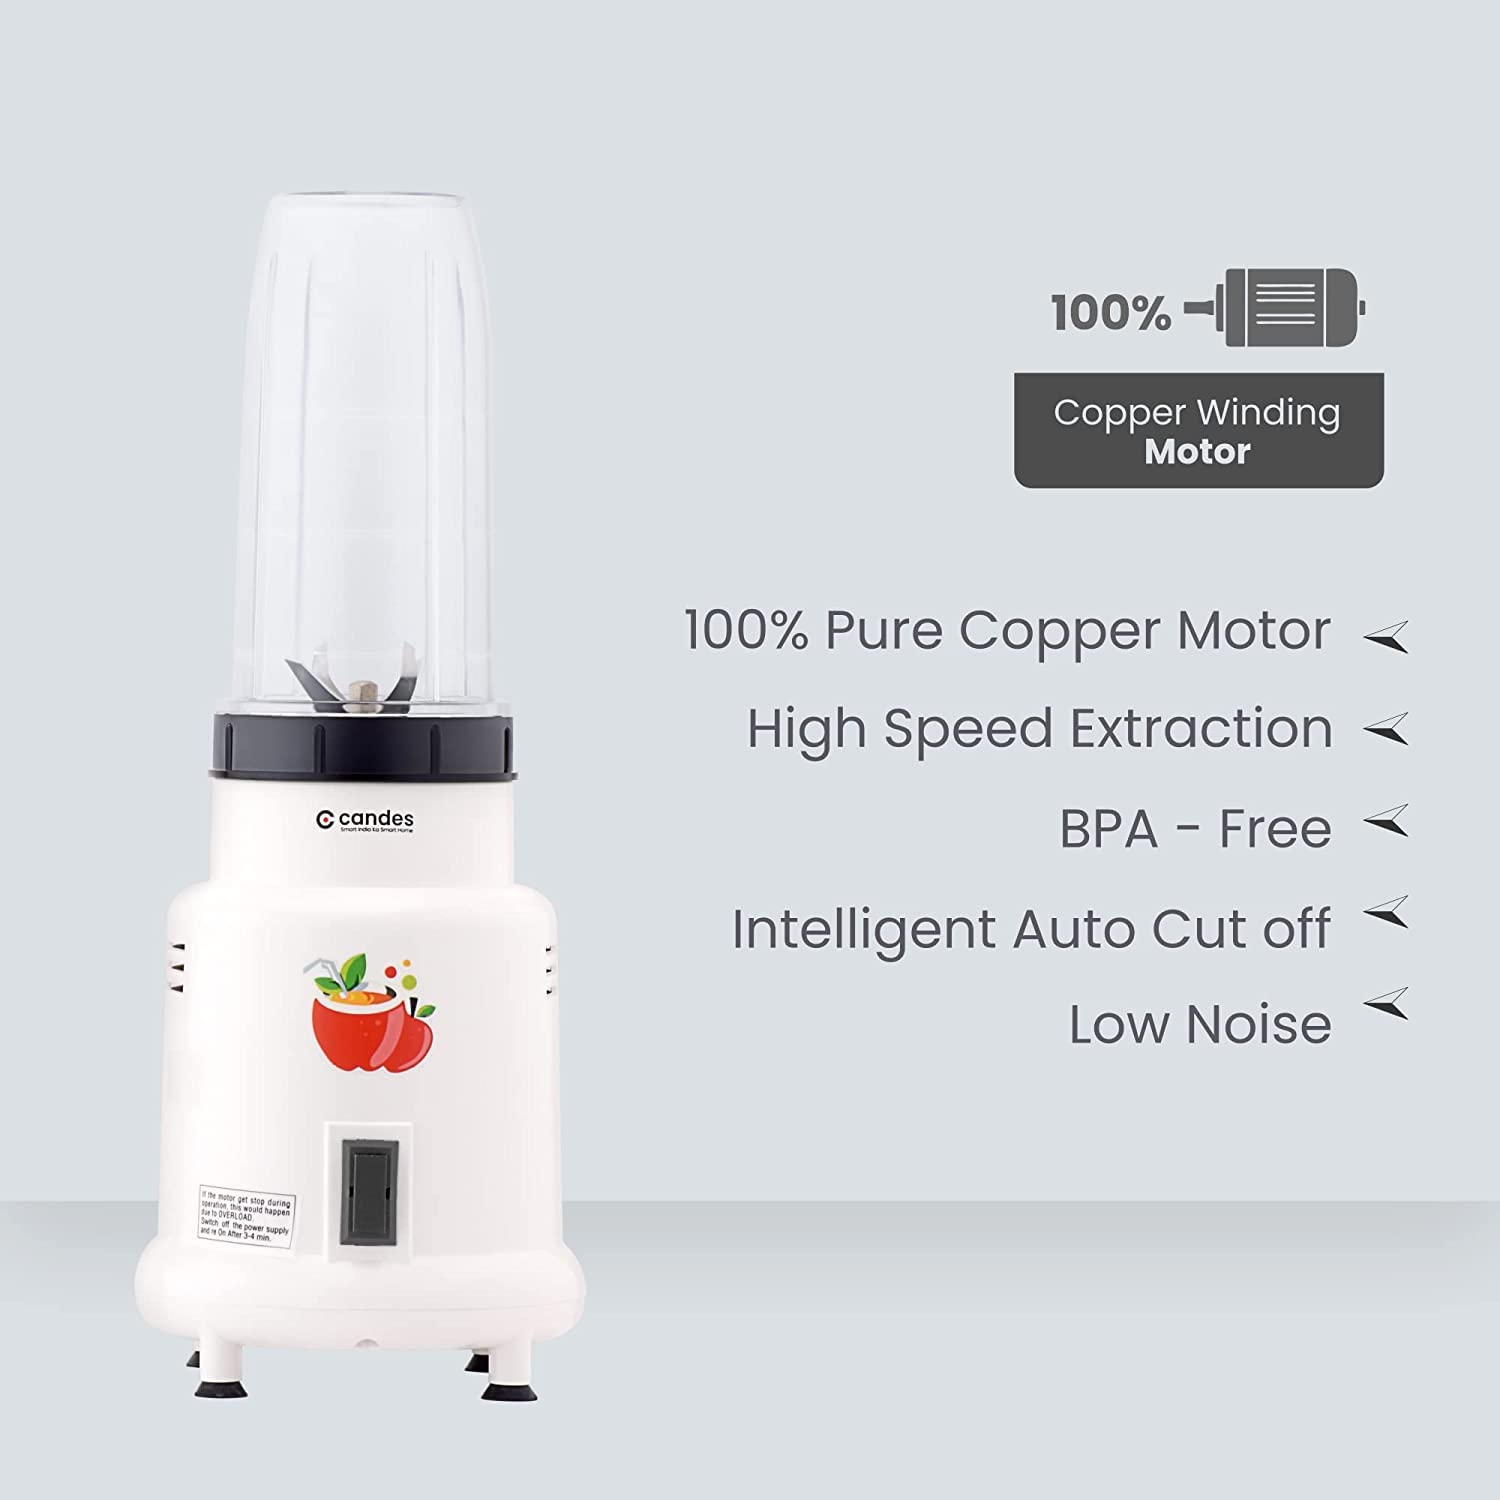 Candes Hector Nutri Blender Complete Kitchen Machine, 22000 RPM, SS Blades, 2 Unbreakable Jars, 1 Years Warranty, 400-Watts (White) + Quick Hand Vegetables & Fruits Chopper - Green (Super Combo)